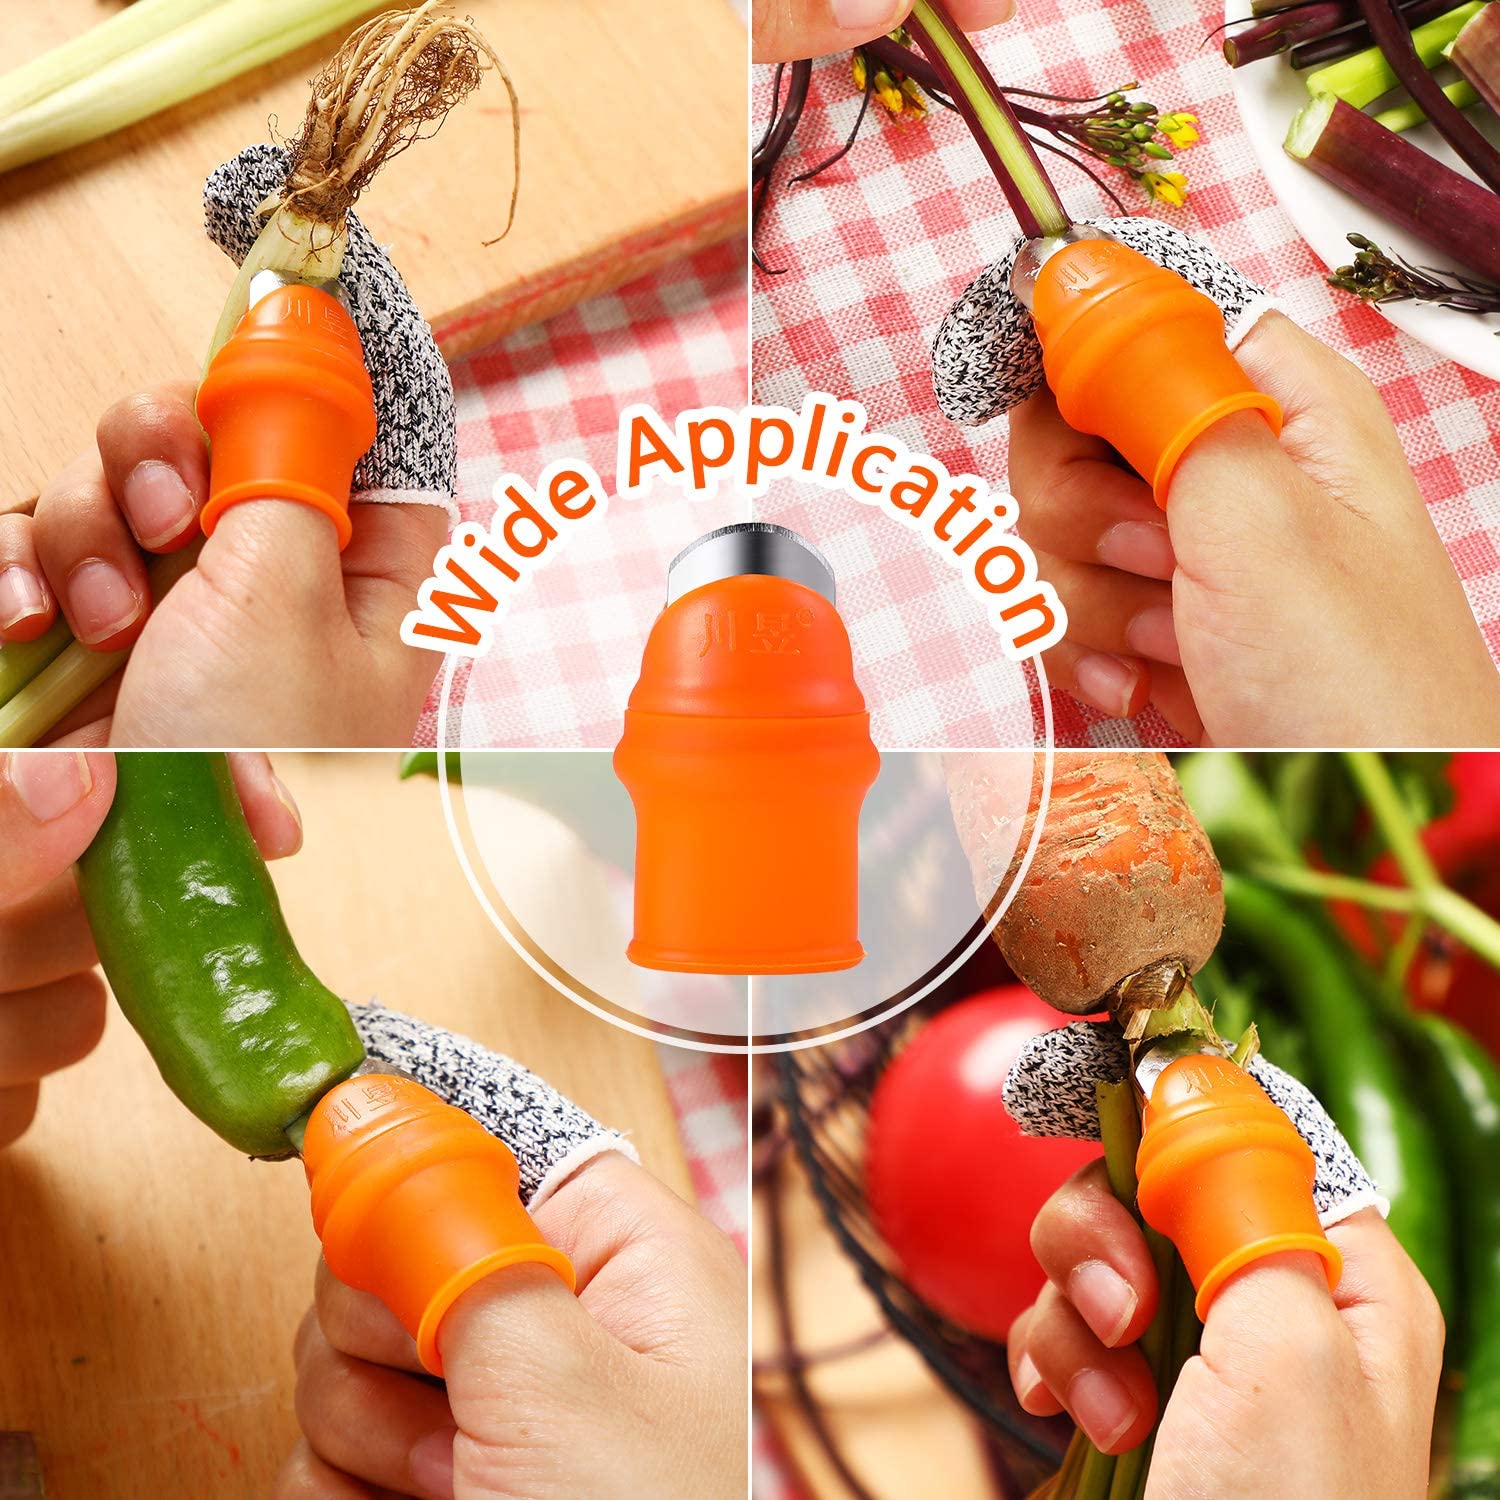 Silicone Thumb Knife - Clever silicone thumb blade gardening and pruning tool